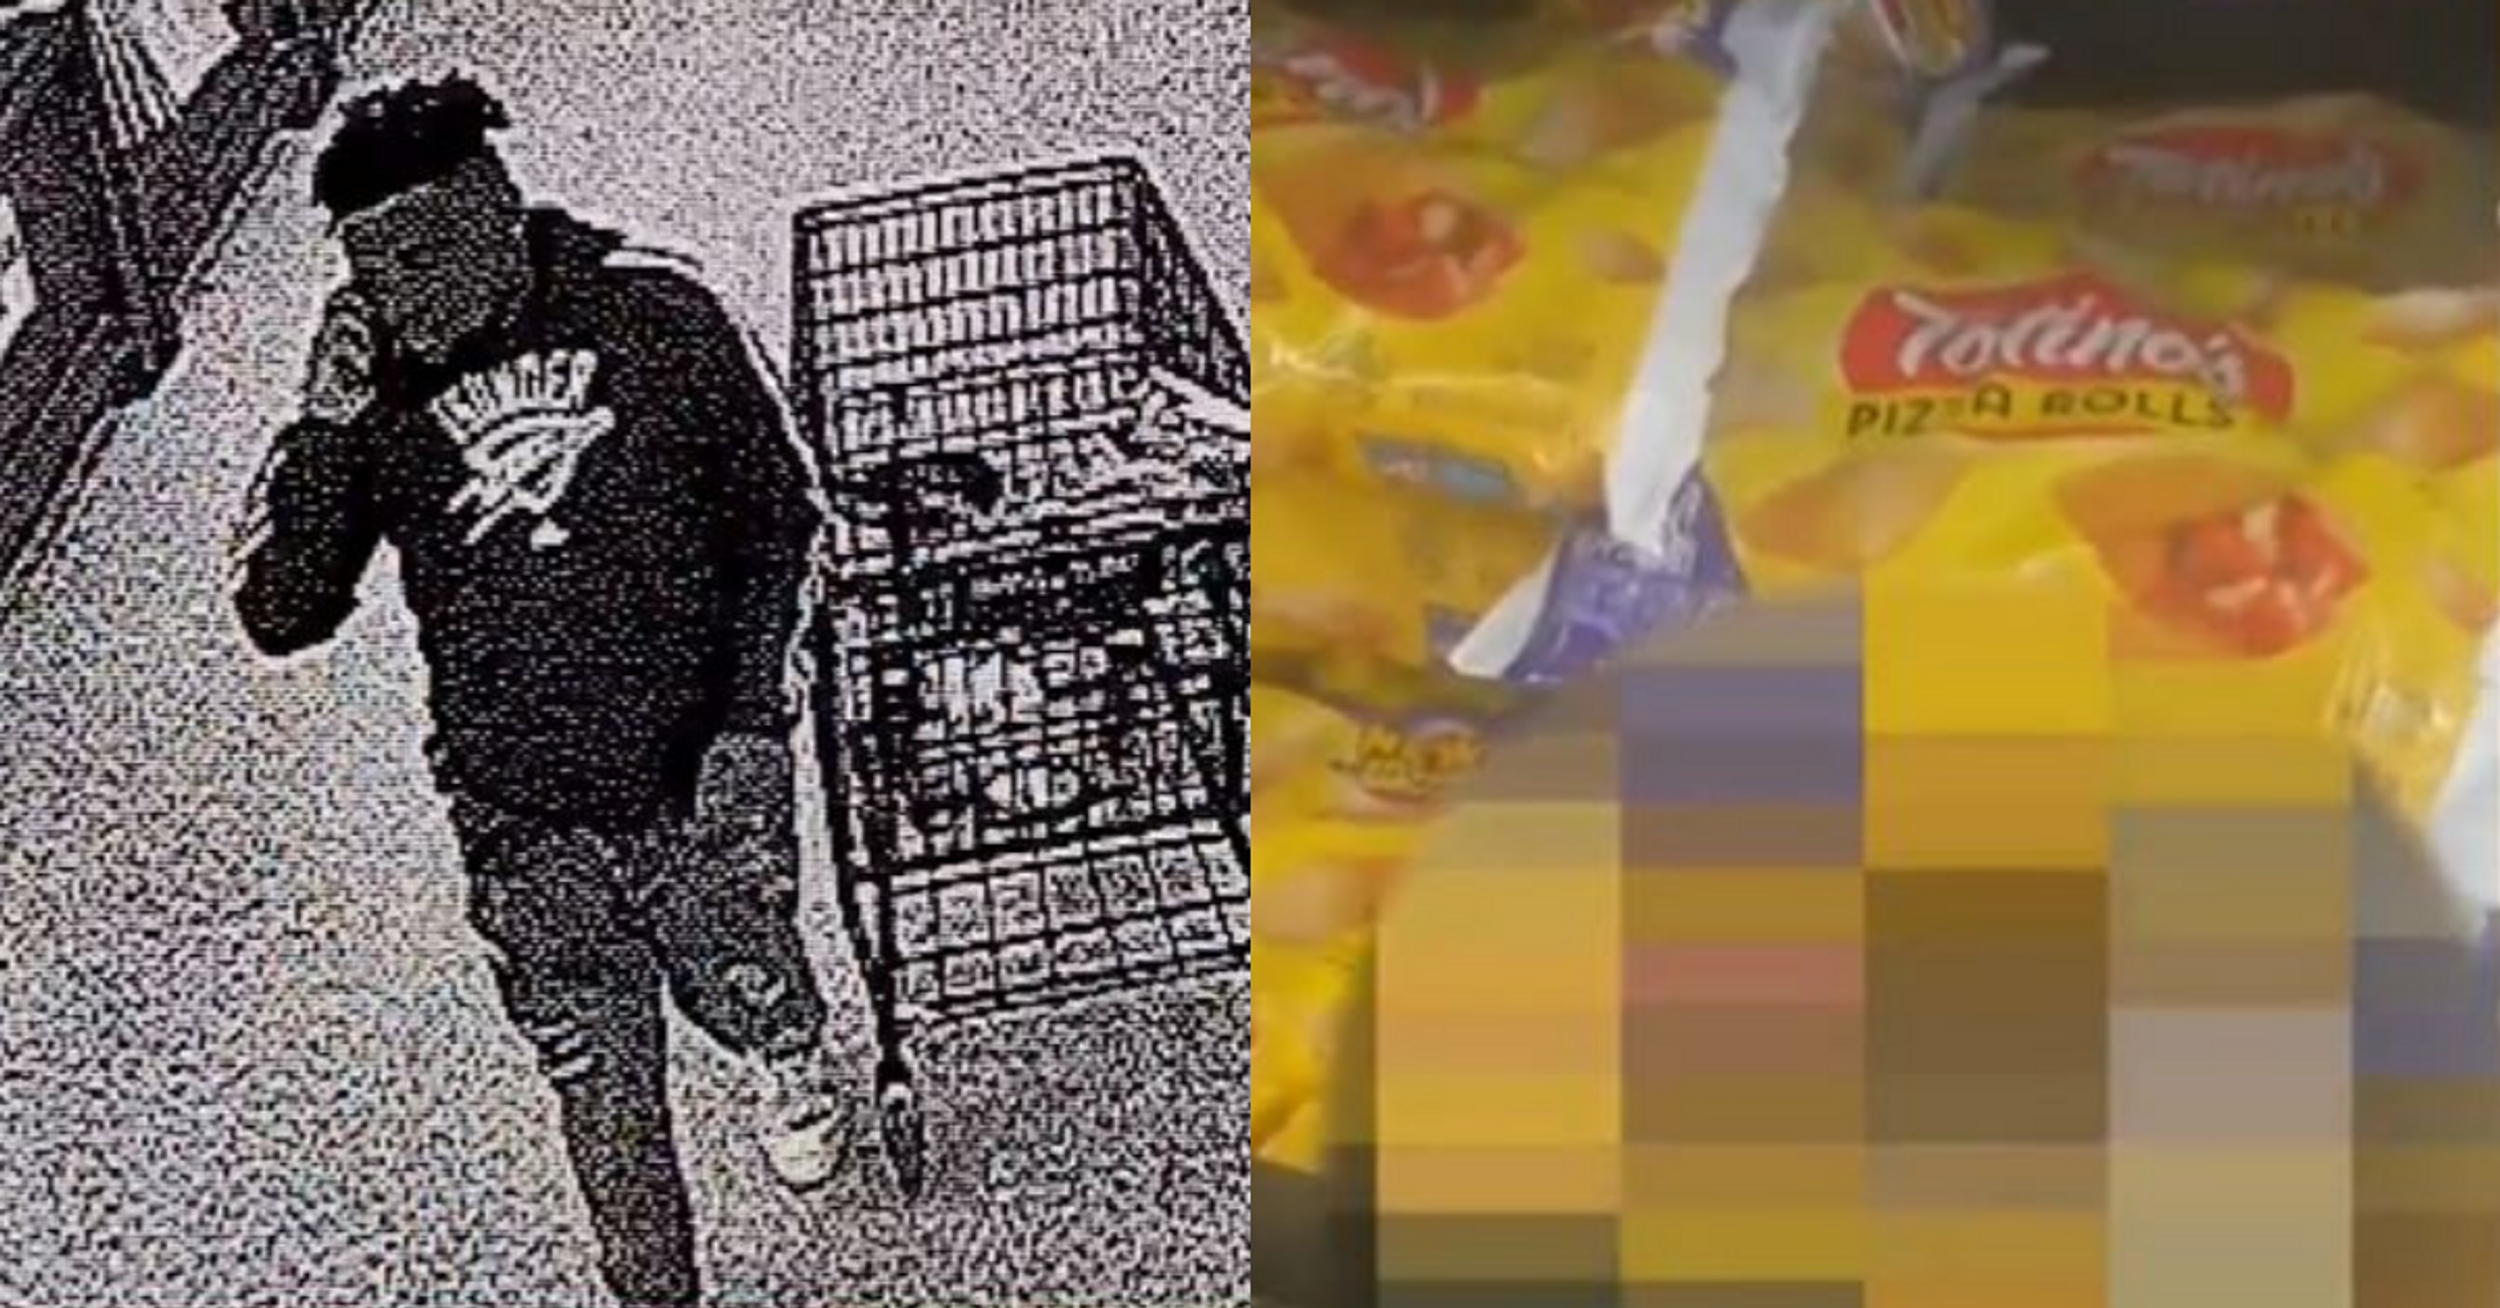 Alleged 'Pizza Pooper' Arrested After Defecating On Totino's Pizza Rolls In Grocery Store Freezer